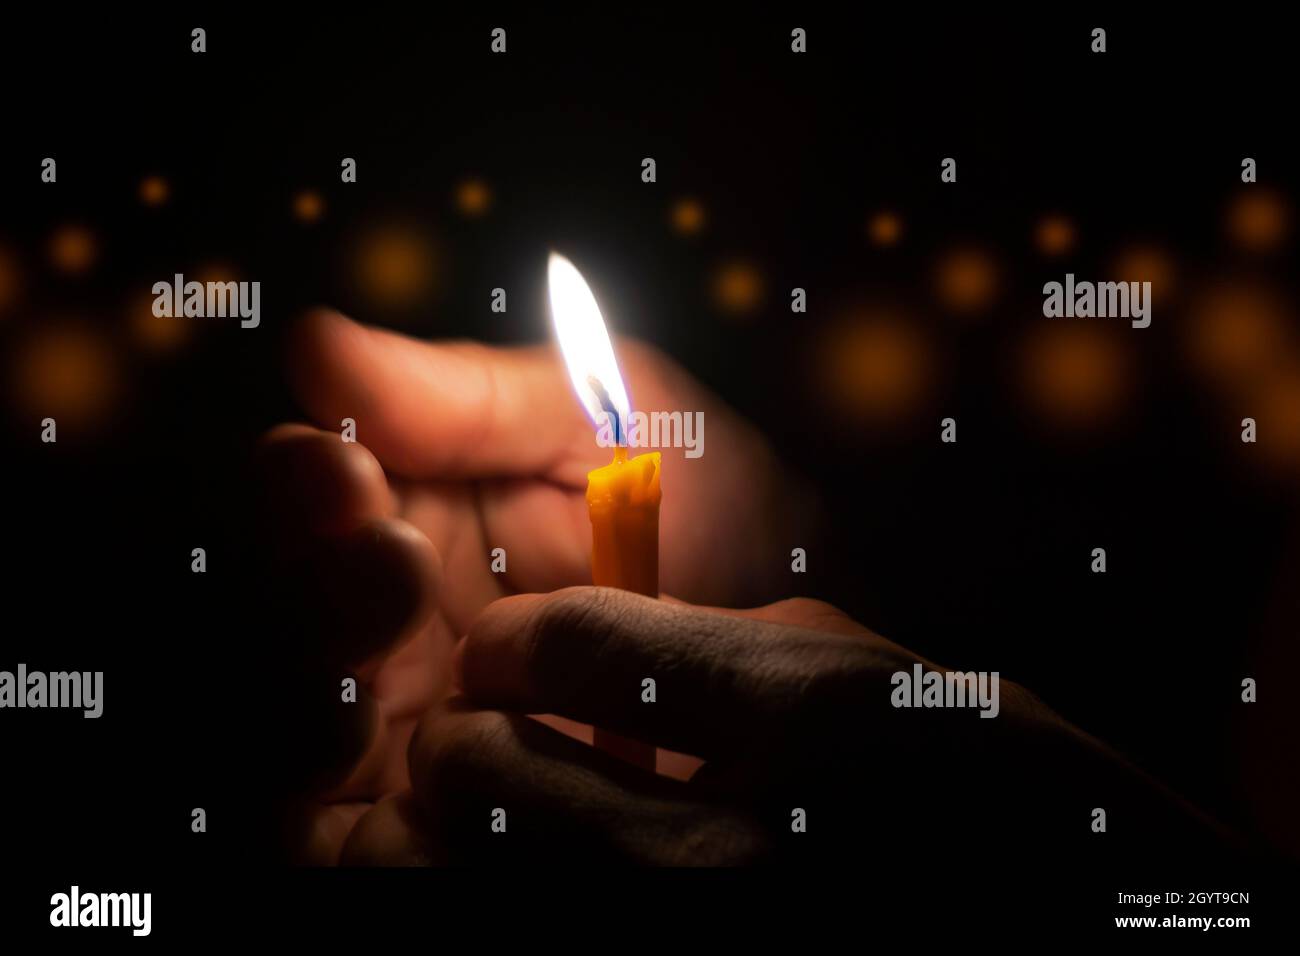 Man Holding Burning Match While Lighting Candles In Dark Kitchen During Power  Outage Stock Photo, Picture and Royalty Free Image. Image 194083174.